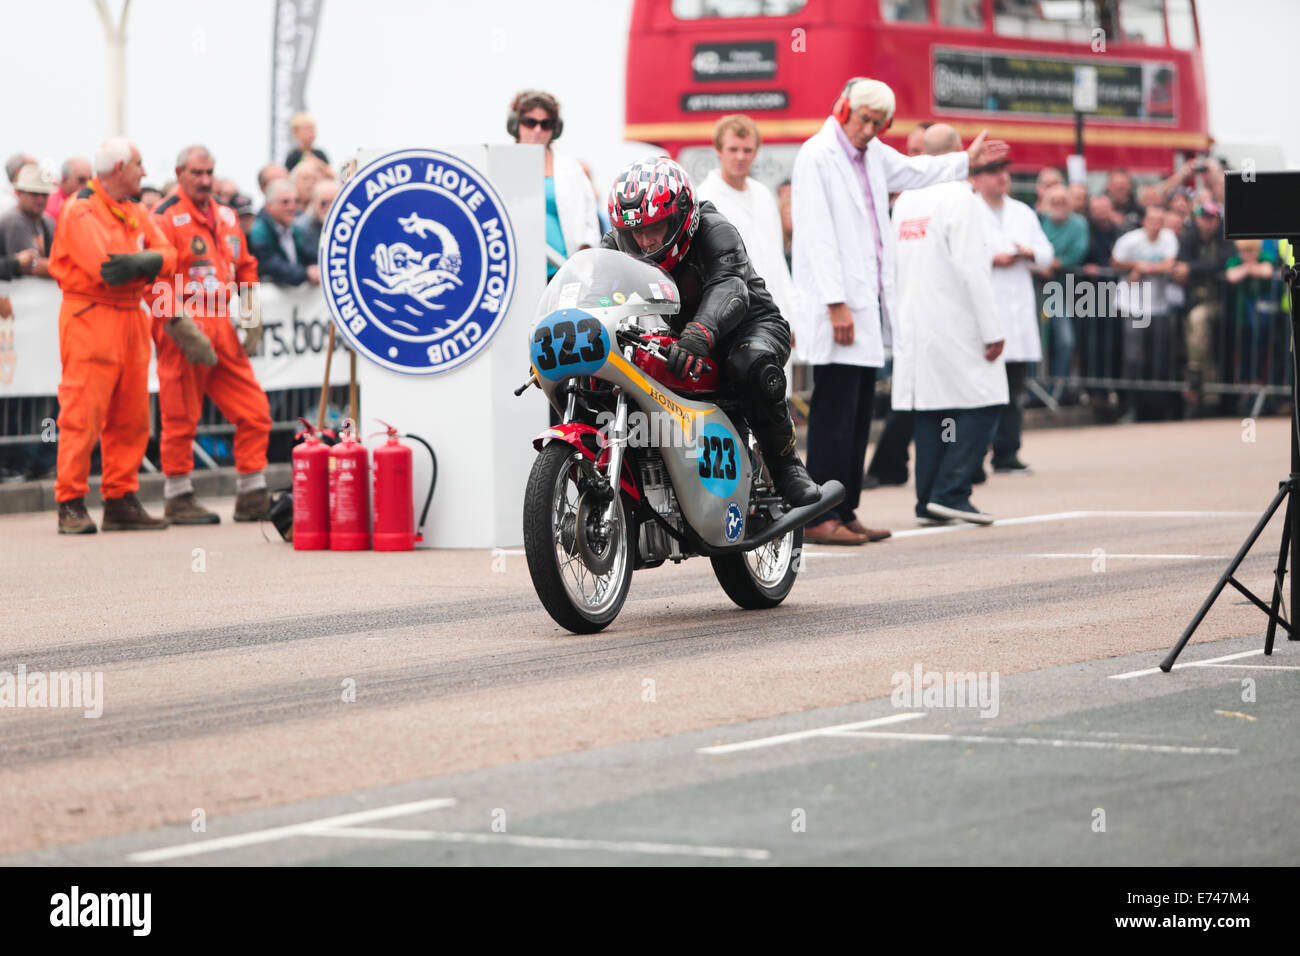 This is David Harvey riding a Honda CR350 at the Brighton National Speed Trials organised by the Brighton & Hove Motor Club held annually at Madeira Drive, Brighton Seafront, Brighton, East Sussex, UK. 6th September 2014 Stock Photo